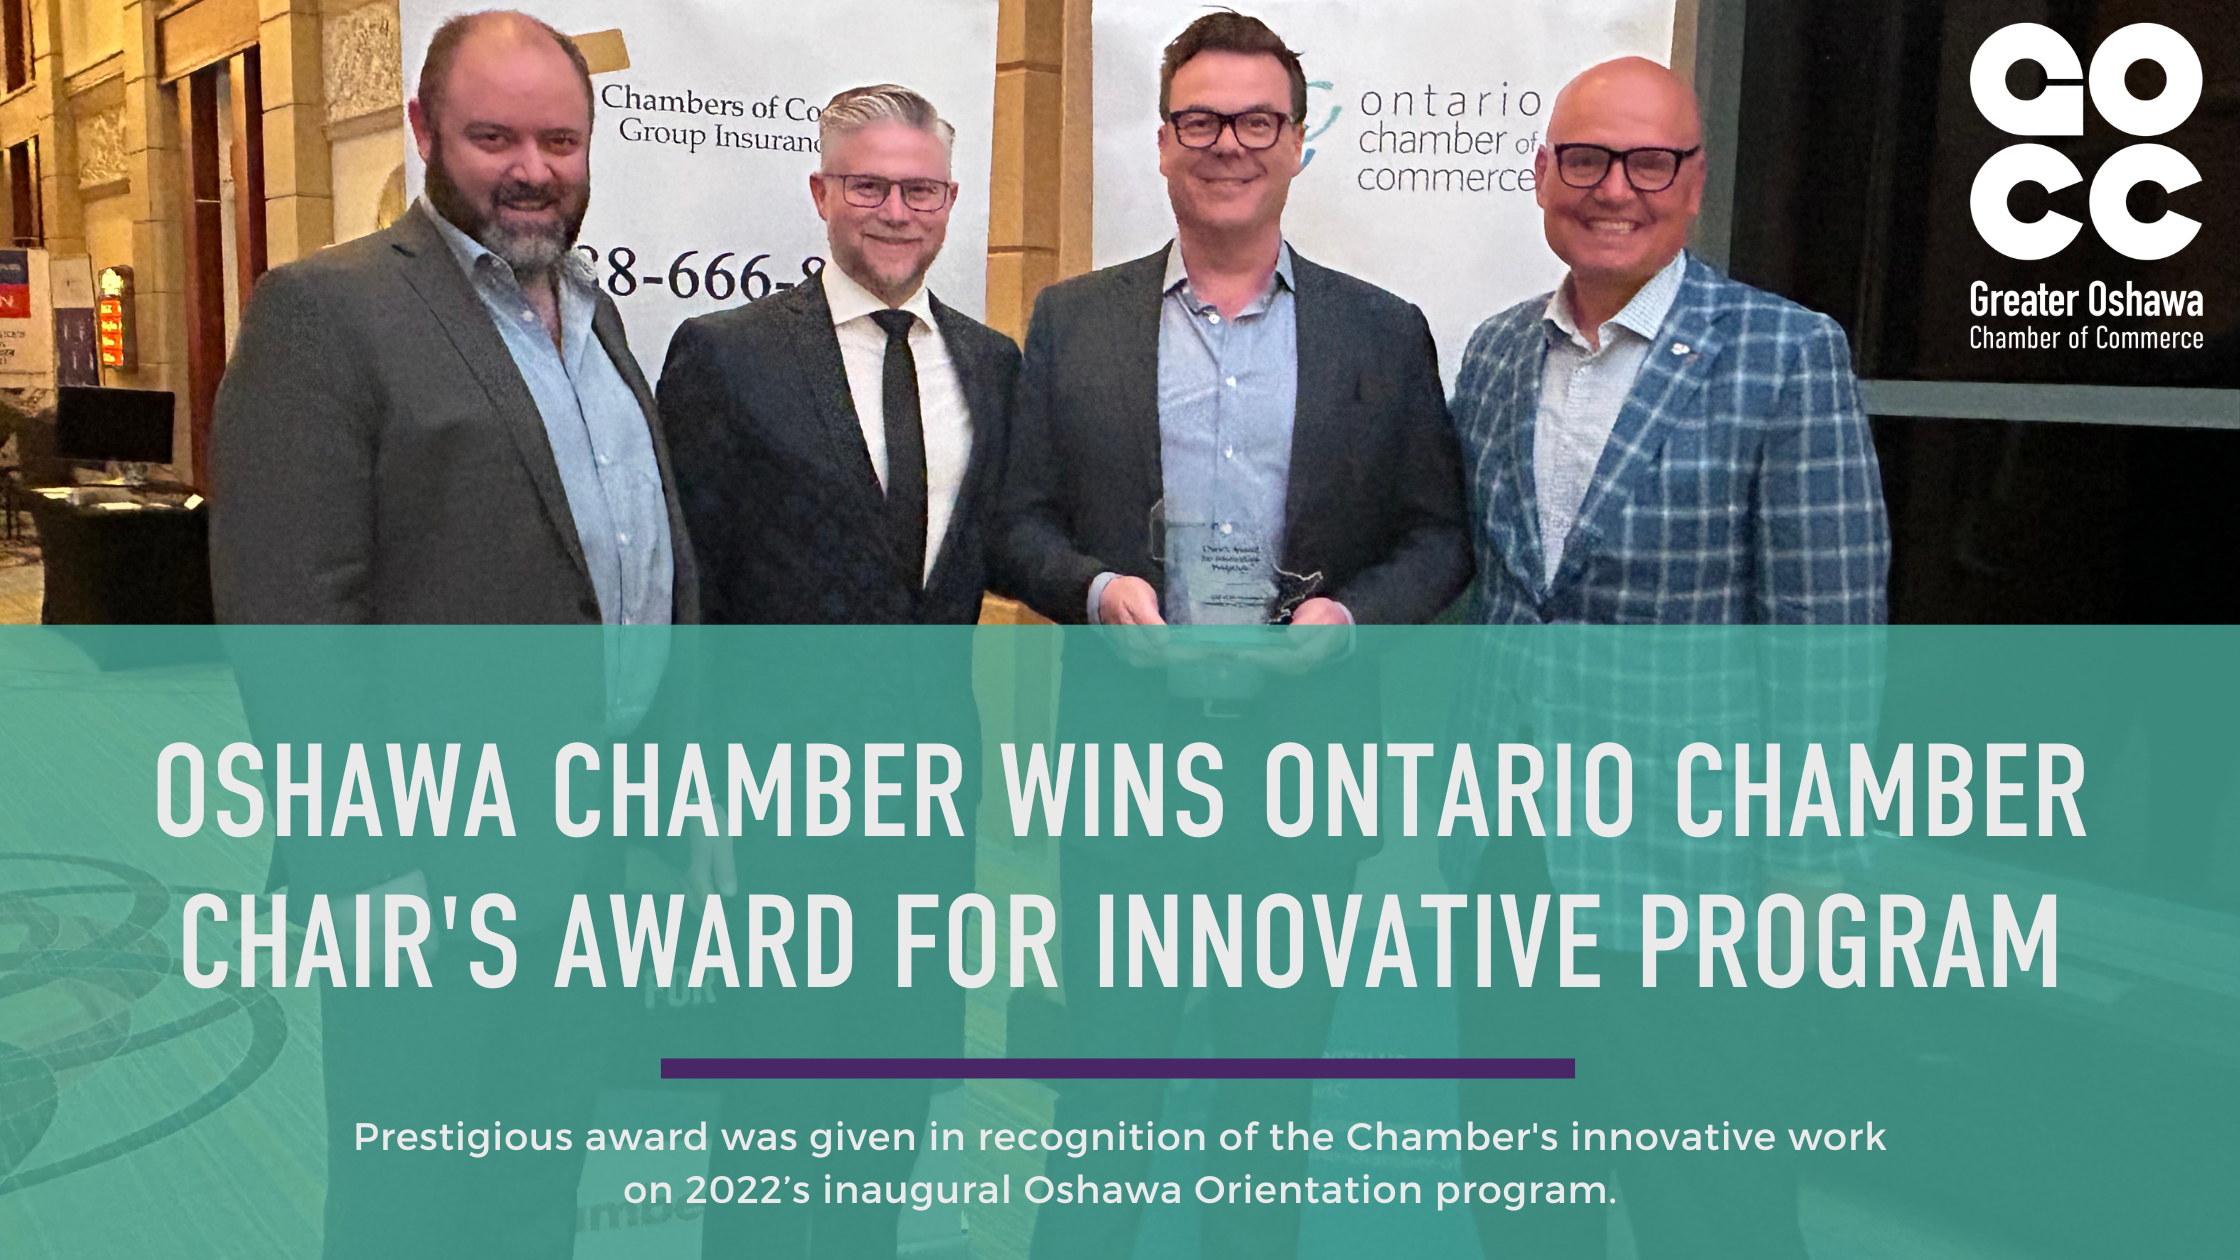 You are currently viewing Oshawa Chamber of Commerce Wins Ontario Chamber Chair’s Award for Innovative Program